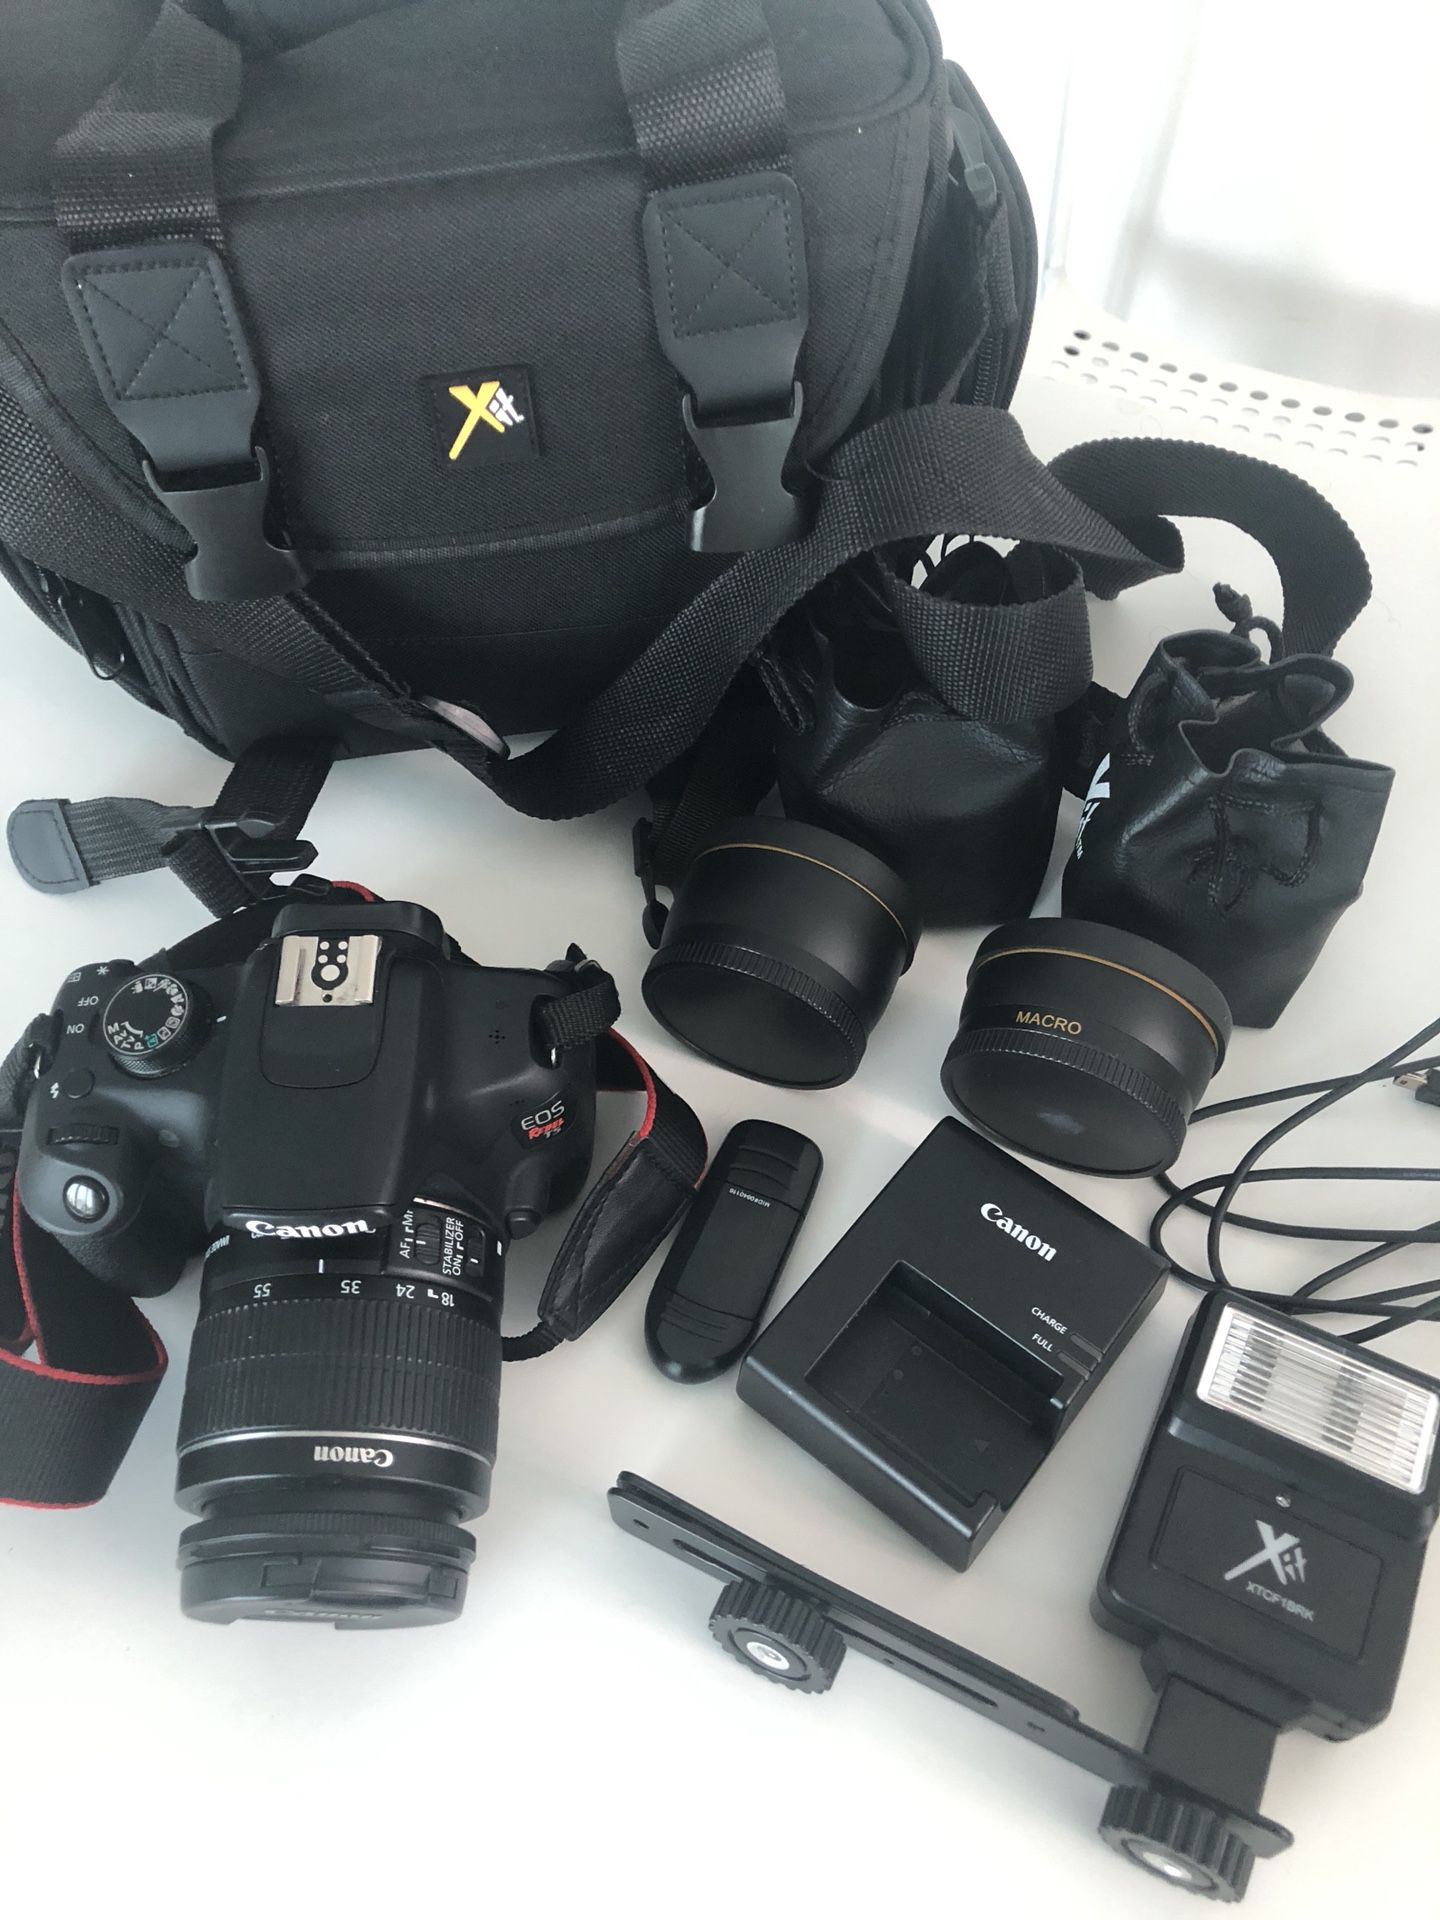 CANON EOS REBEL T5 DSLR bundle (camera, lenses, flash, charger, bag, everything you see)